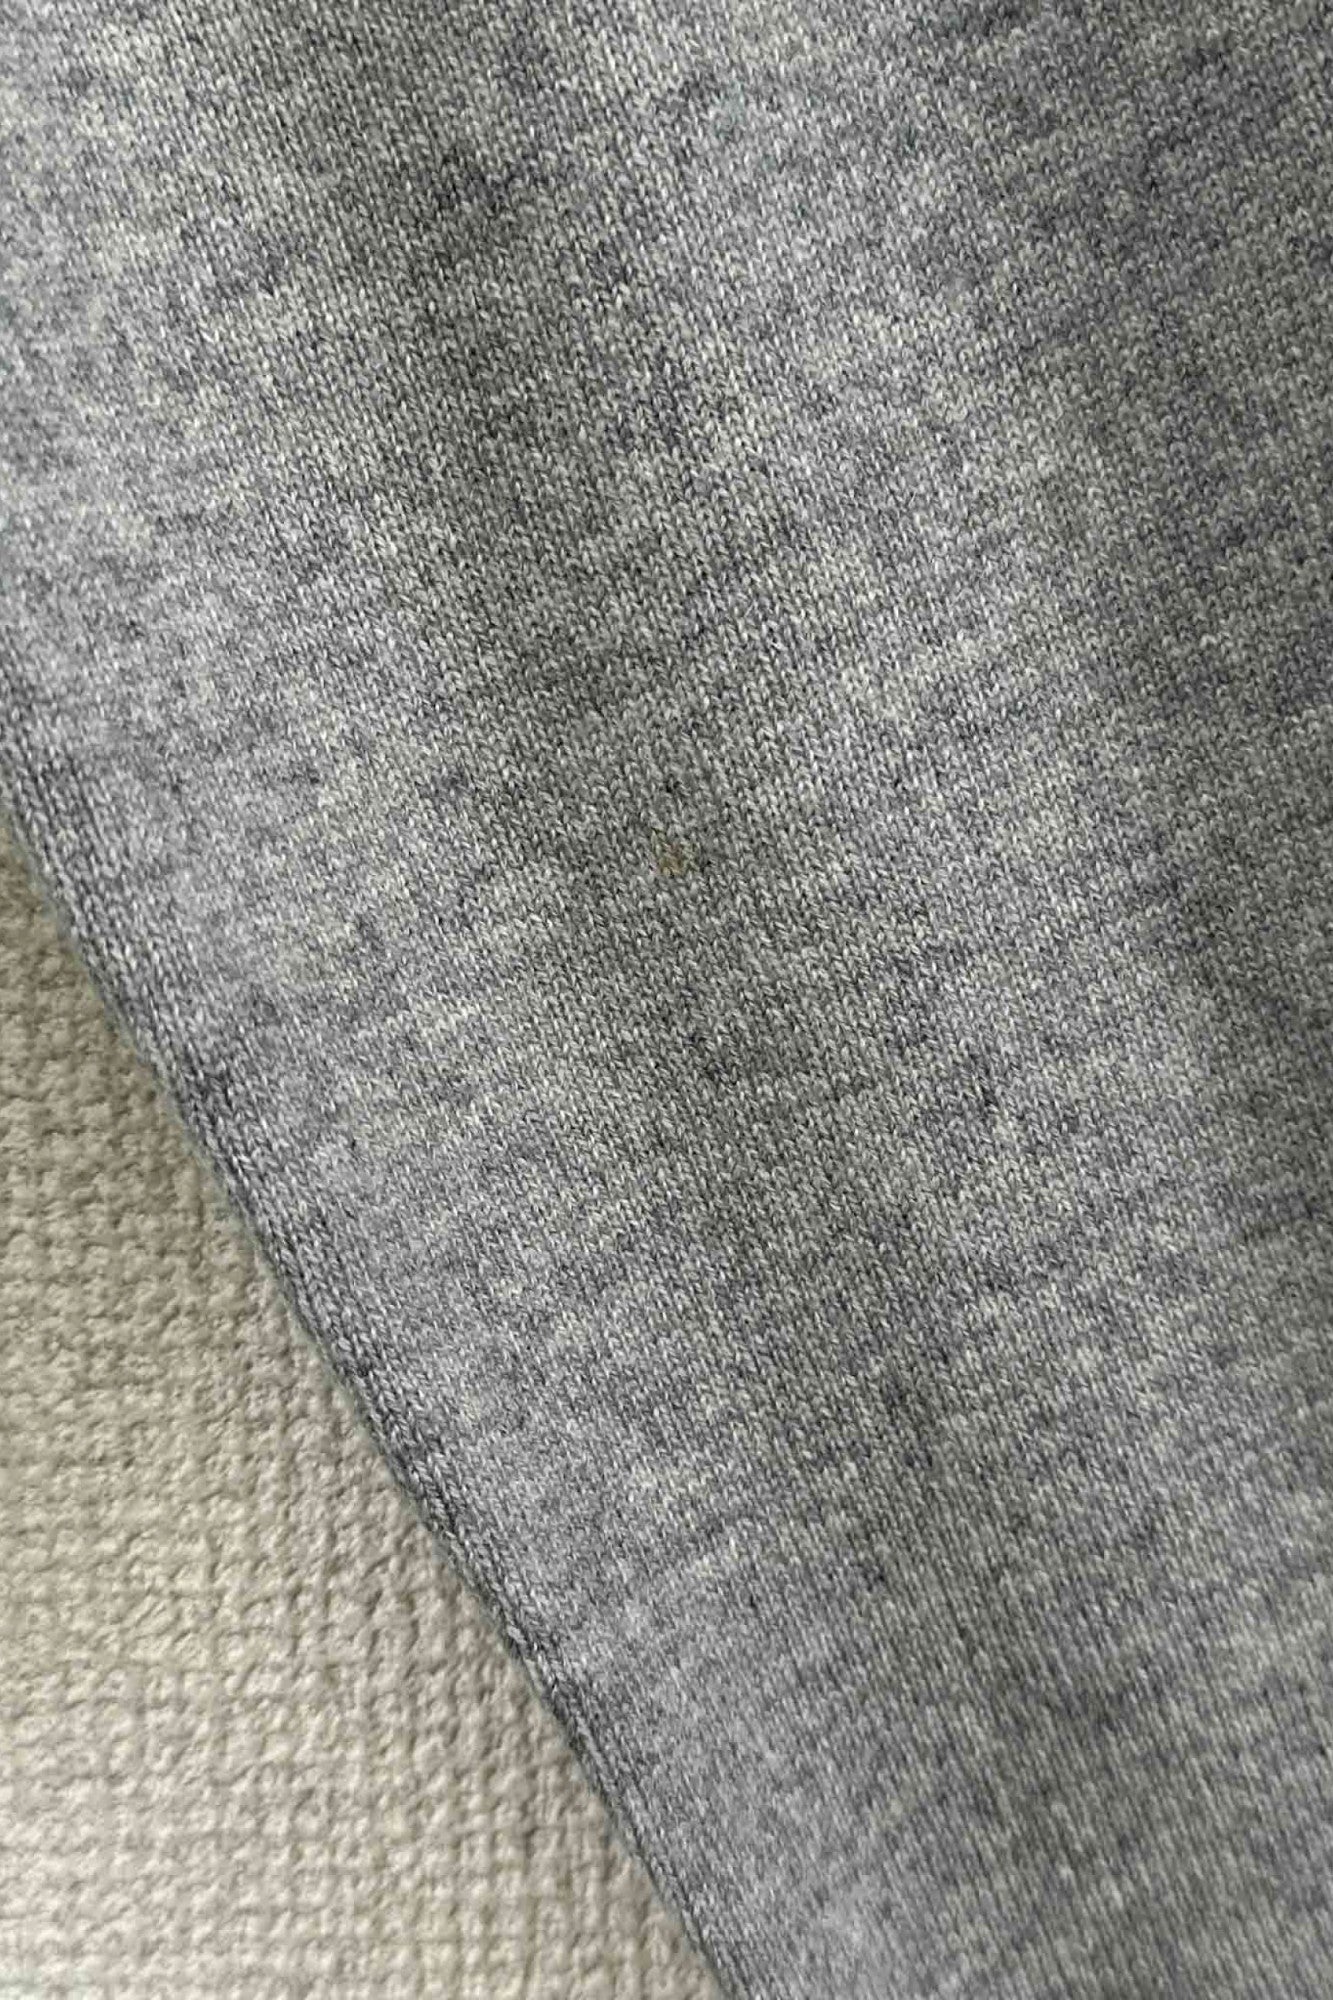 Courreges gray knit cardigan